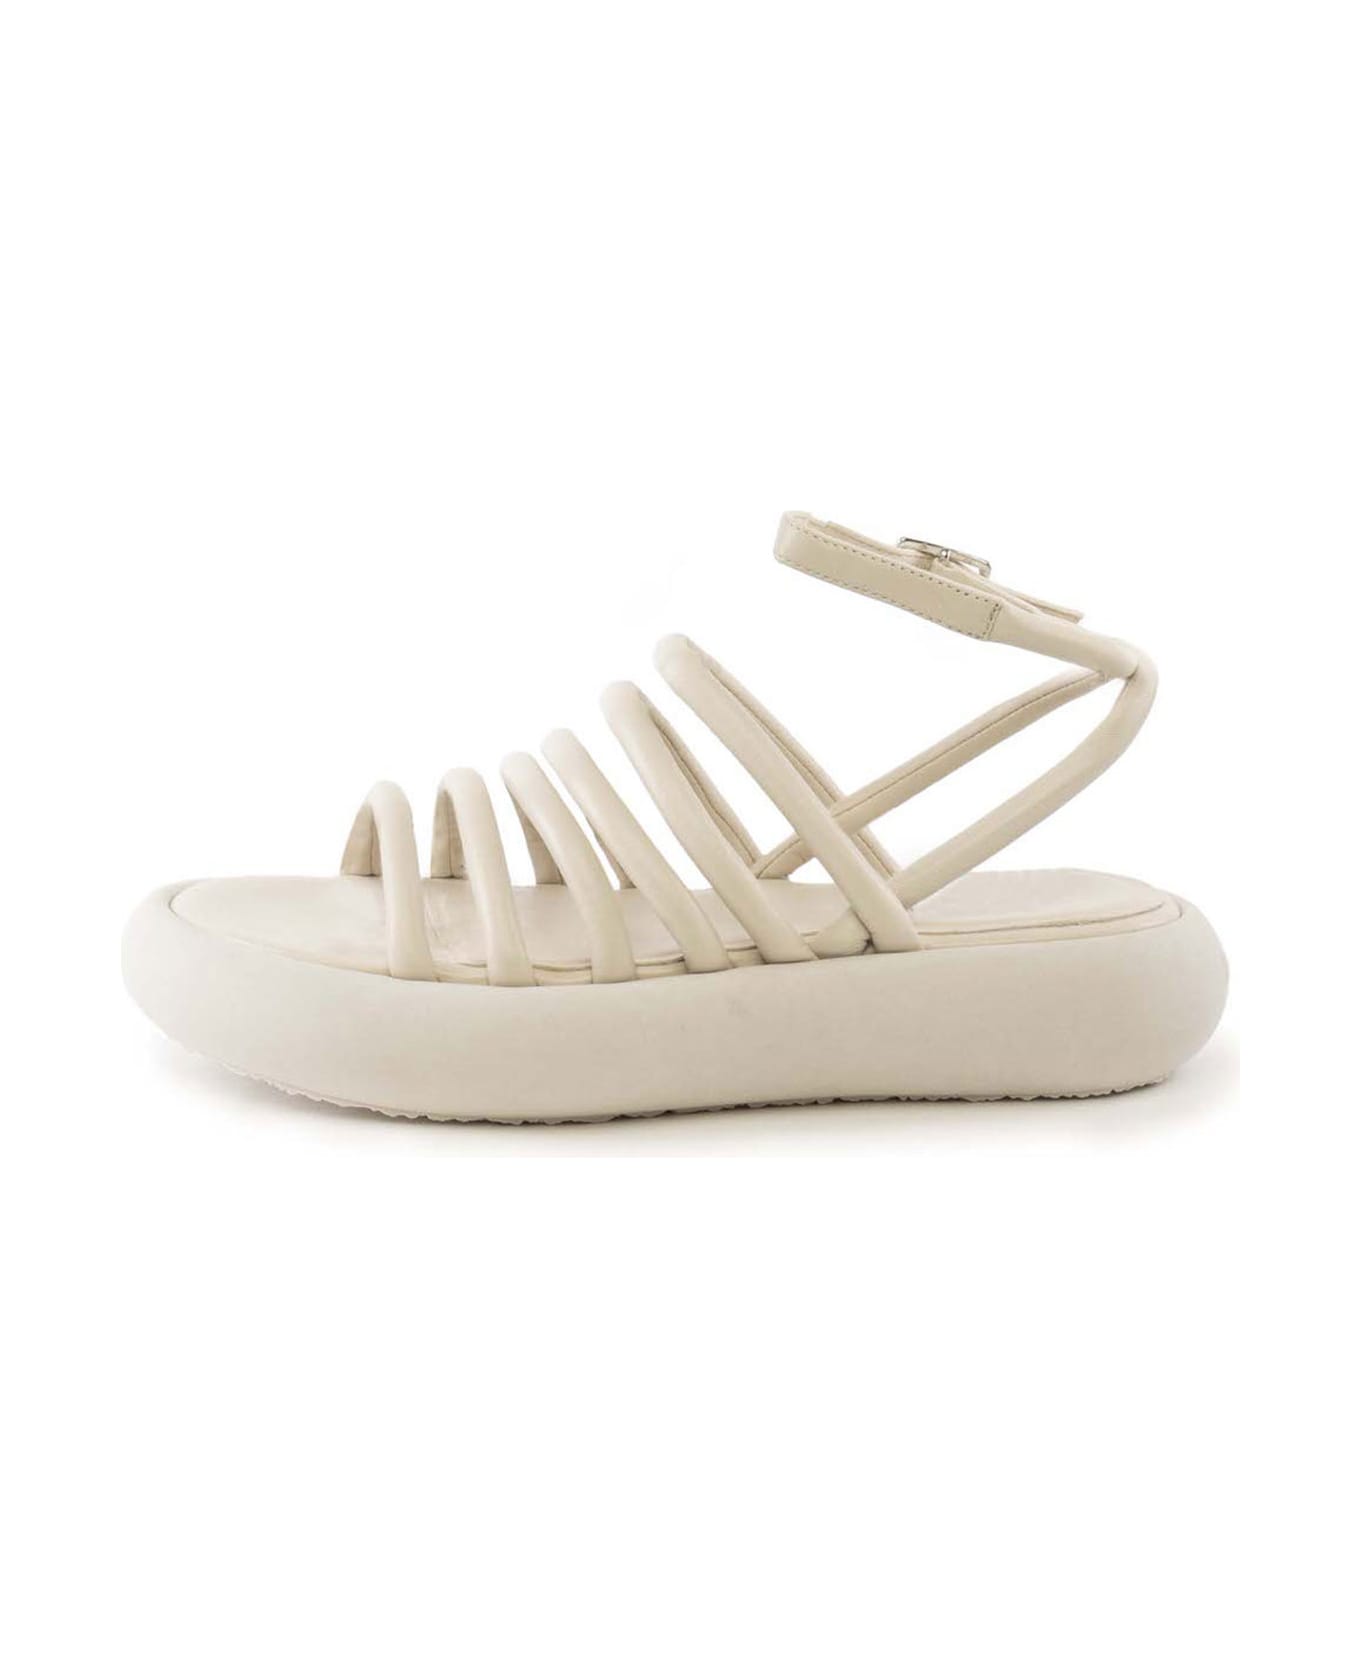 Vic Matié Open Sandals With Strap - OSSO